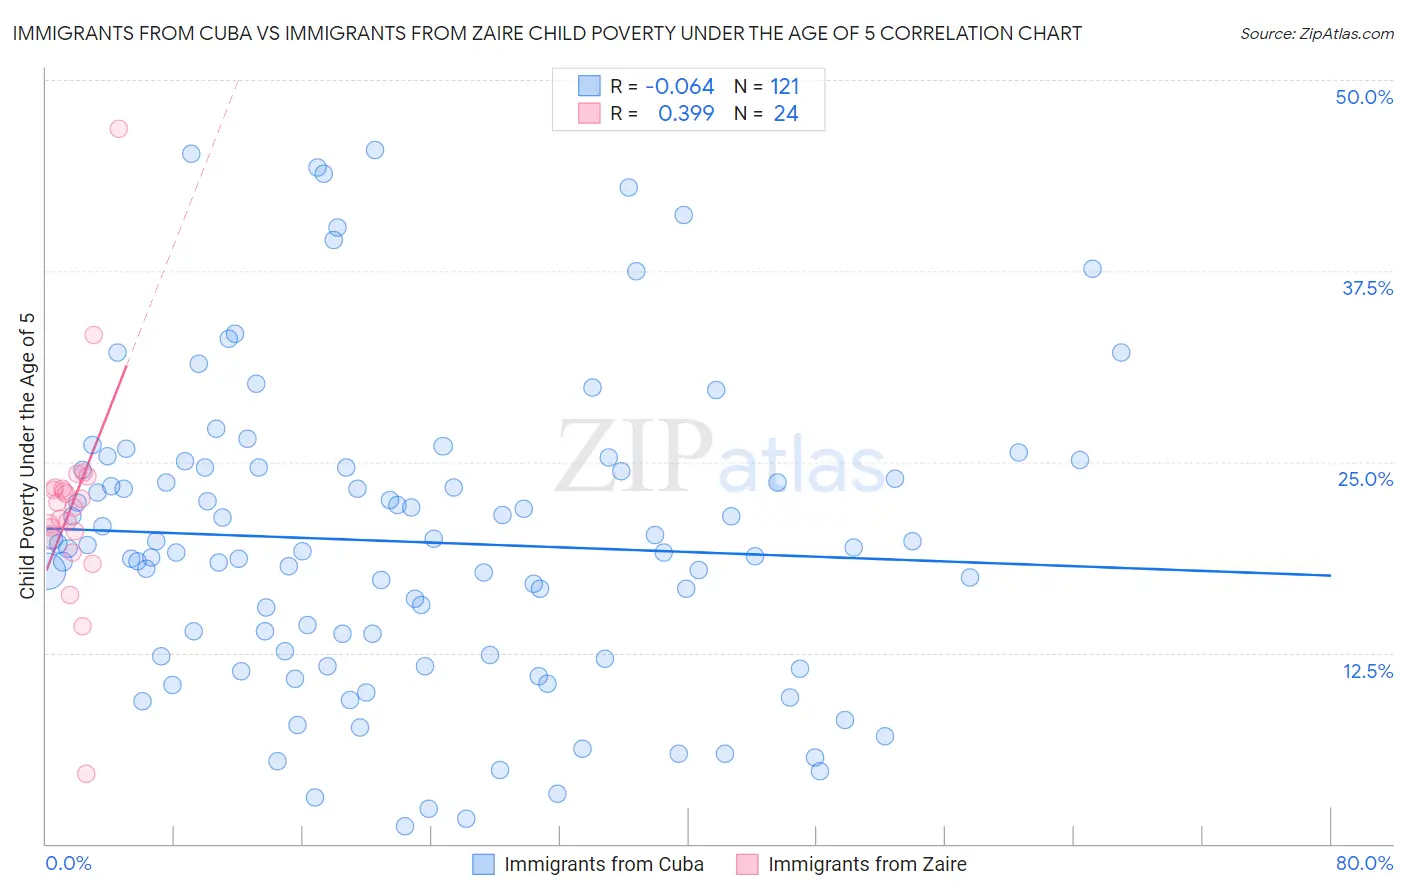 Immigrants from Cuba vs Immigrants from Zaire Child Poverty Under the Age of 5